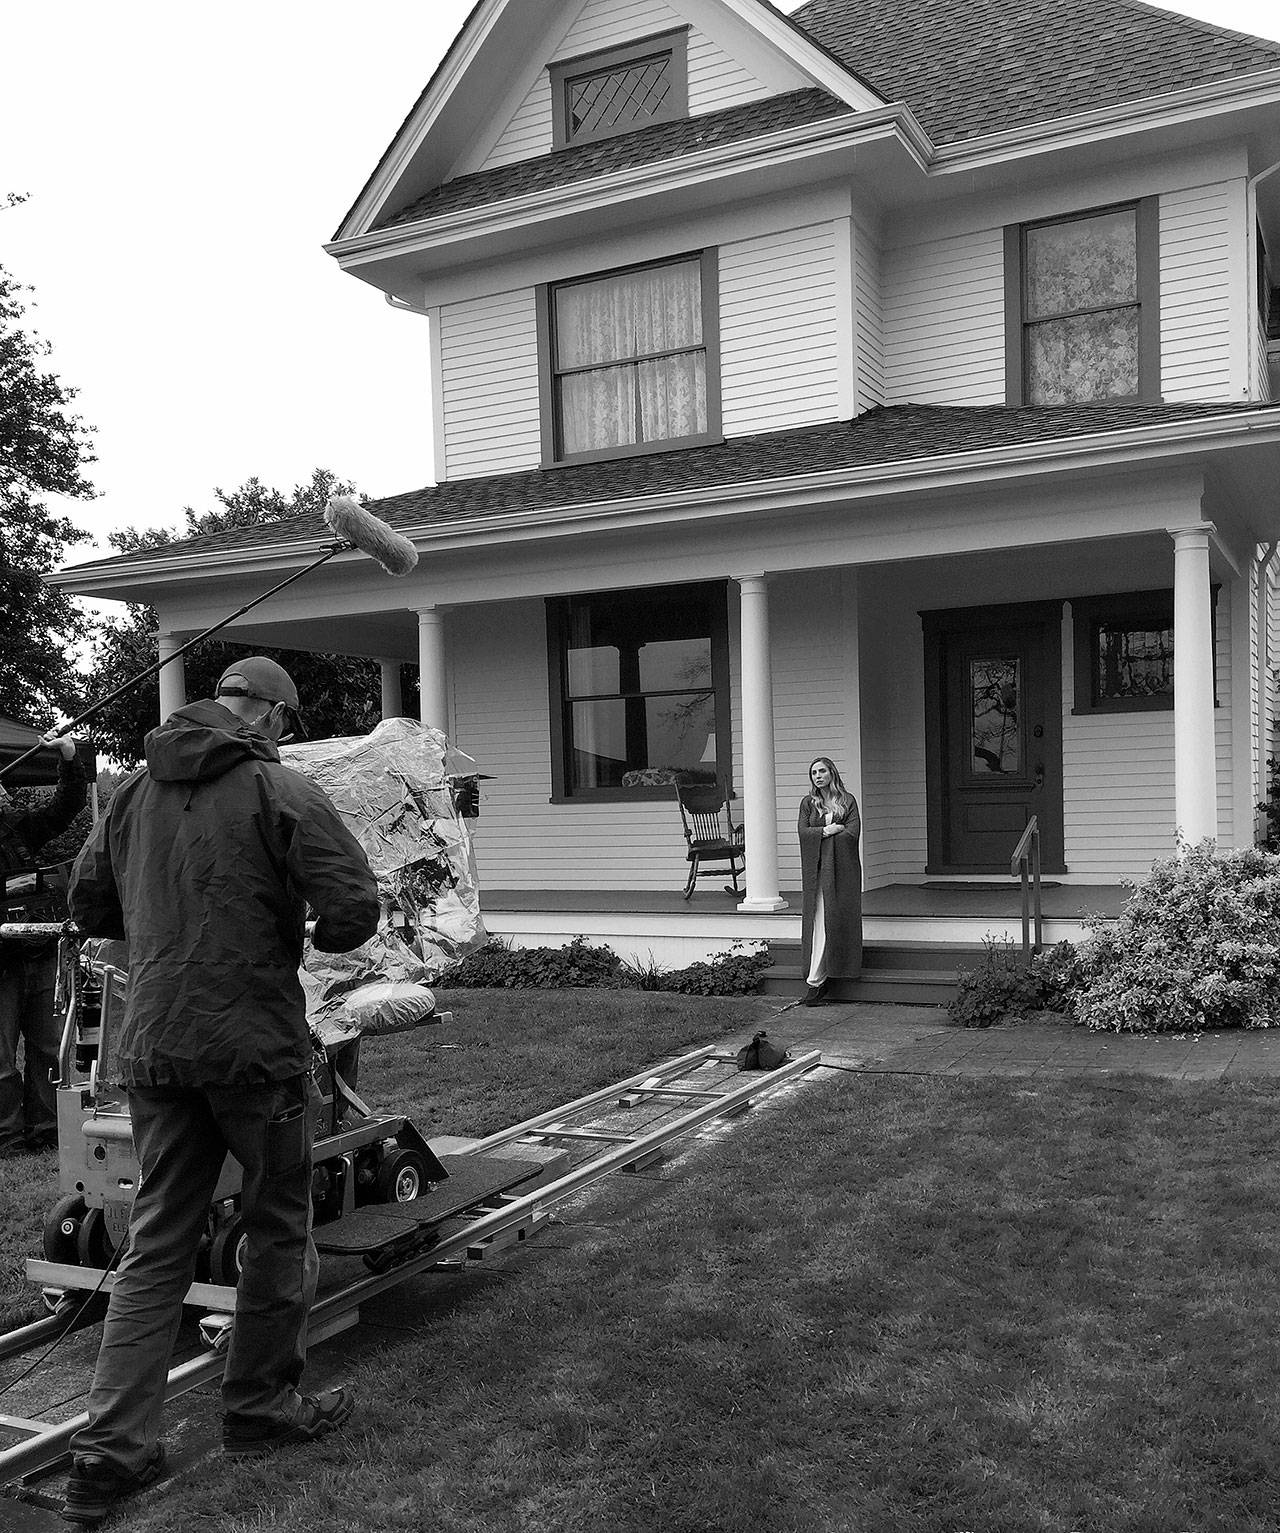 Photos provided                                Above, a crew shoots part of the movie “ECCO” at the Jenne Farm in Coupeville. The film was written and directed by Ben Medina, who was born on Whidbey Island. The spy thriller is set to release Aug. 9. Below, another still from the film.